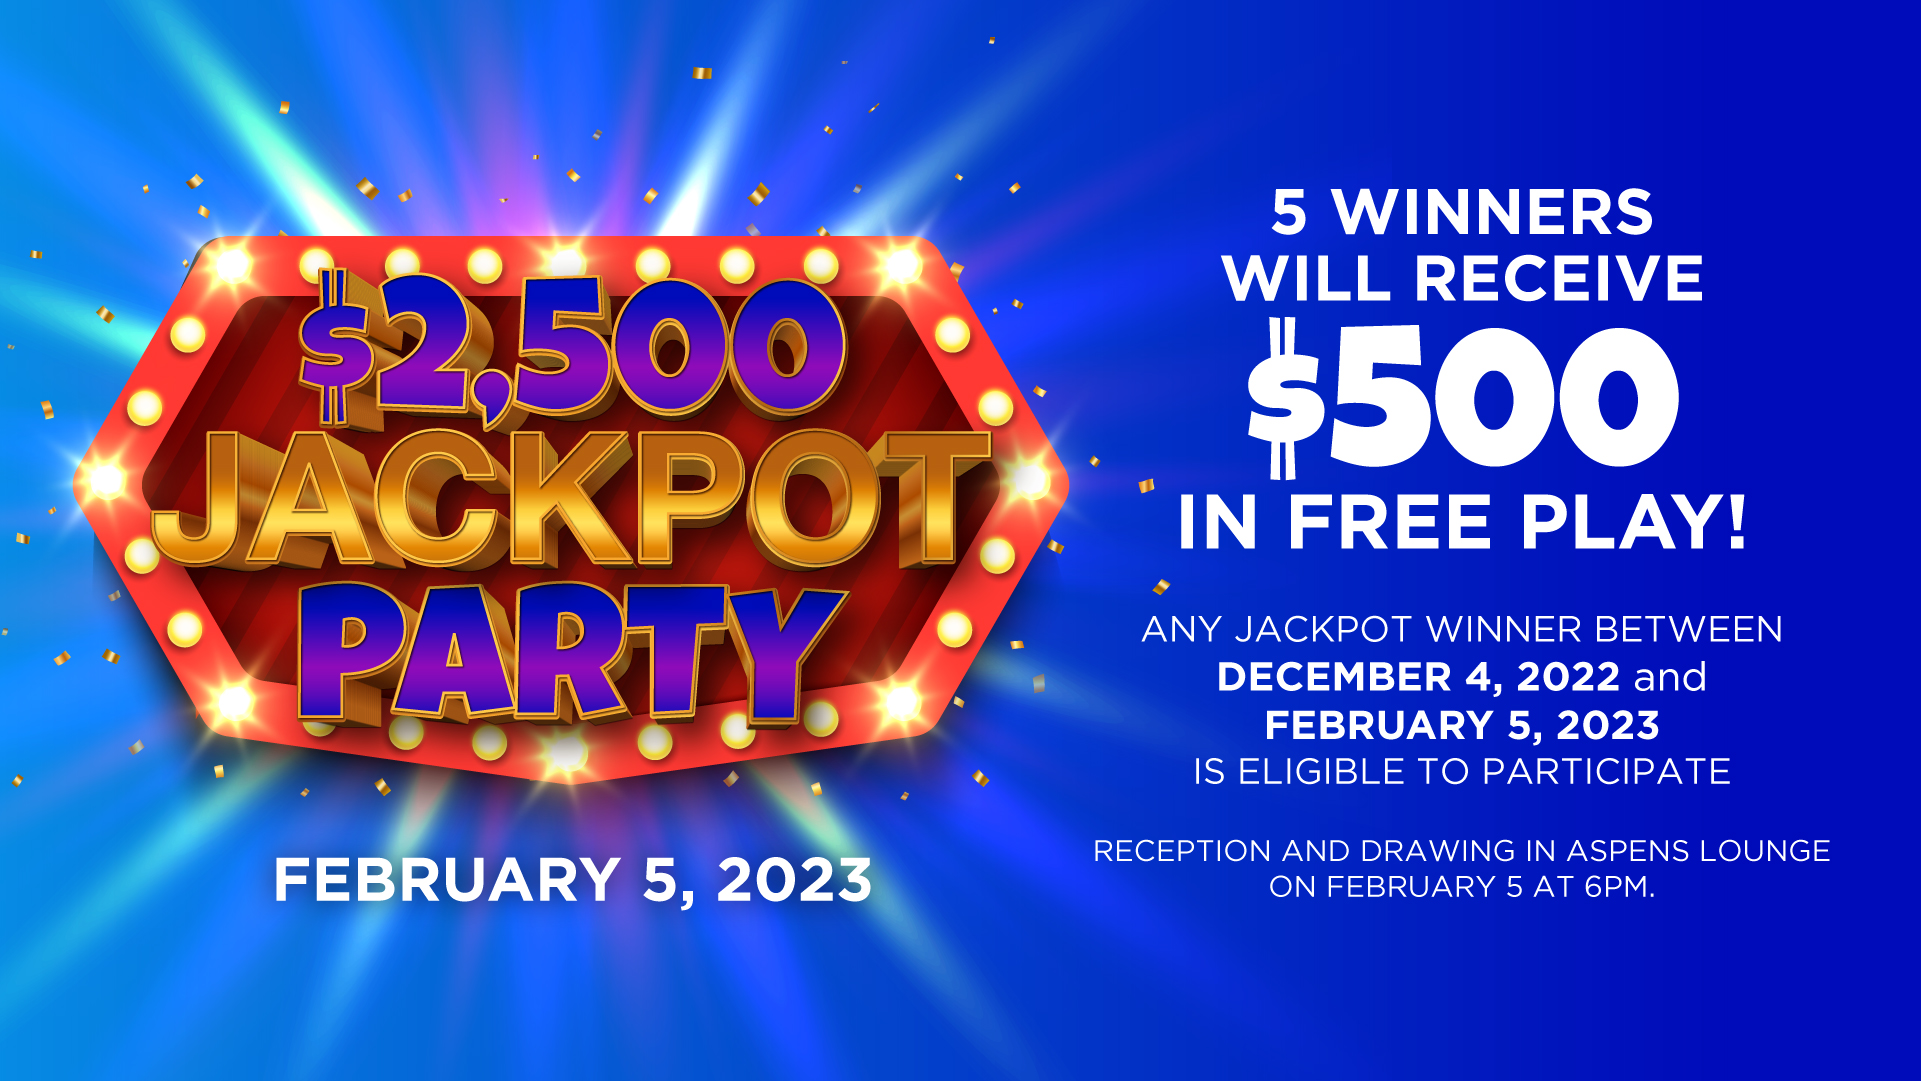 $2,500 Jackpot Party February 5, 2023 5 Winners Will Receive $500 in Free Play! Any jackpot winner between Dec 4, 2022 and February 5, 2023 is elibile to participage Reception and drawing in Aspens Lounge on Feb 5 at 6PM